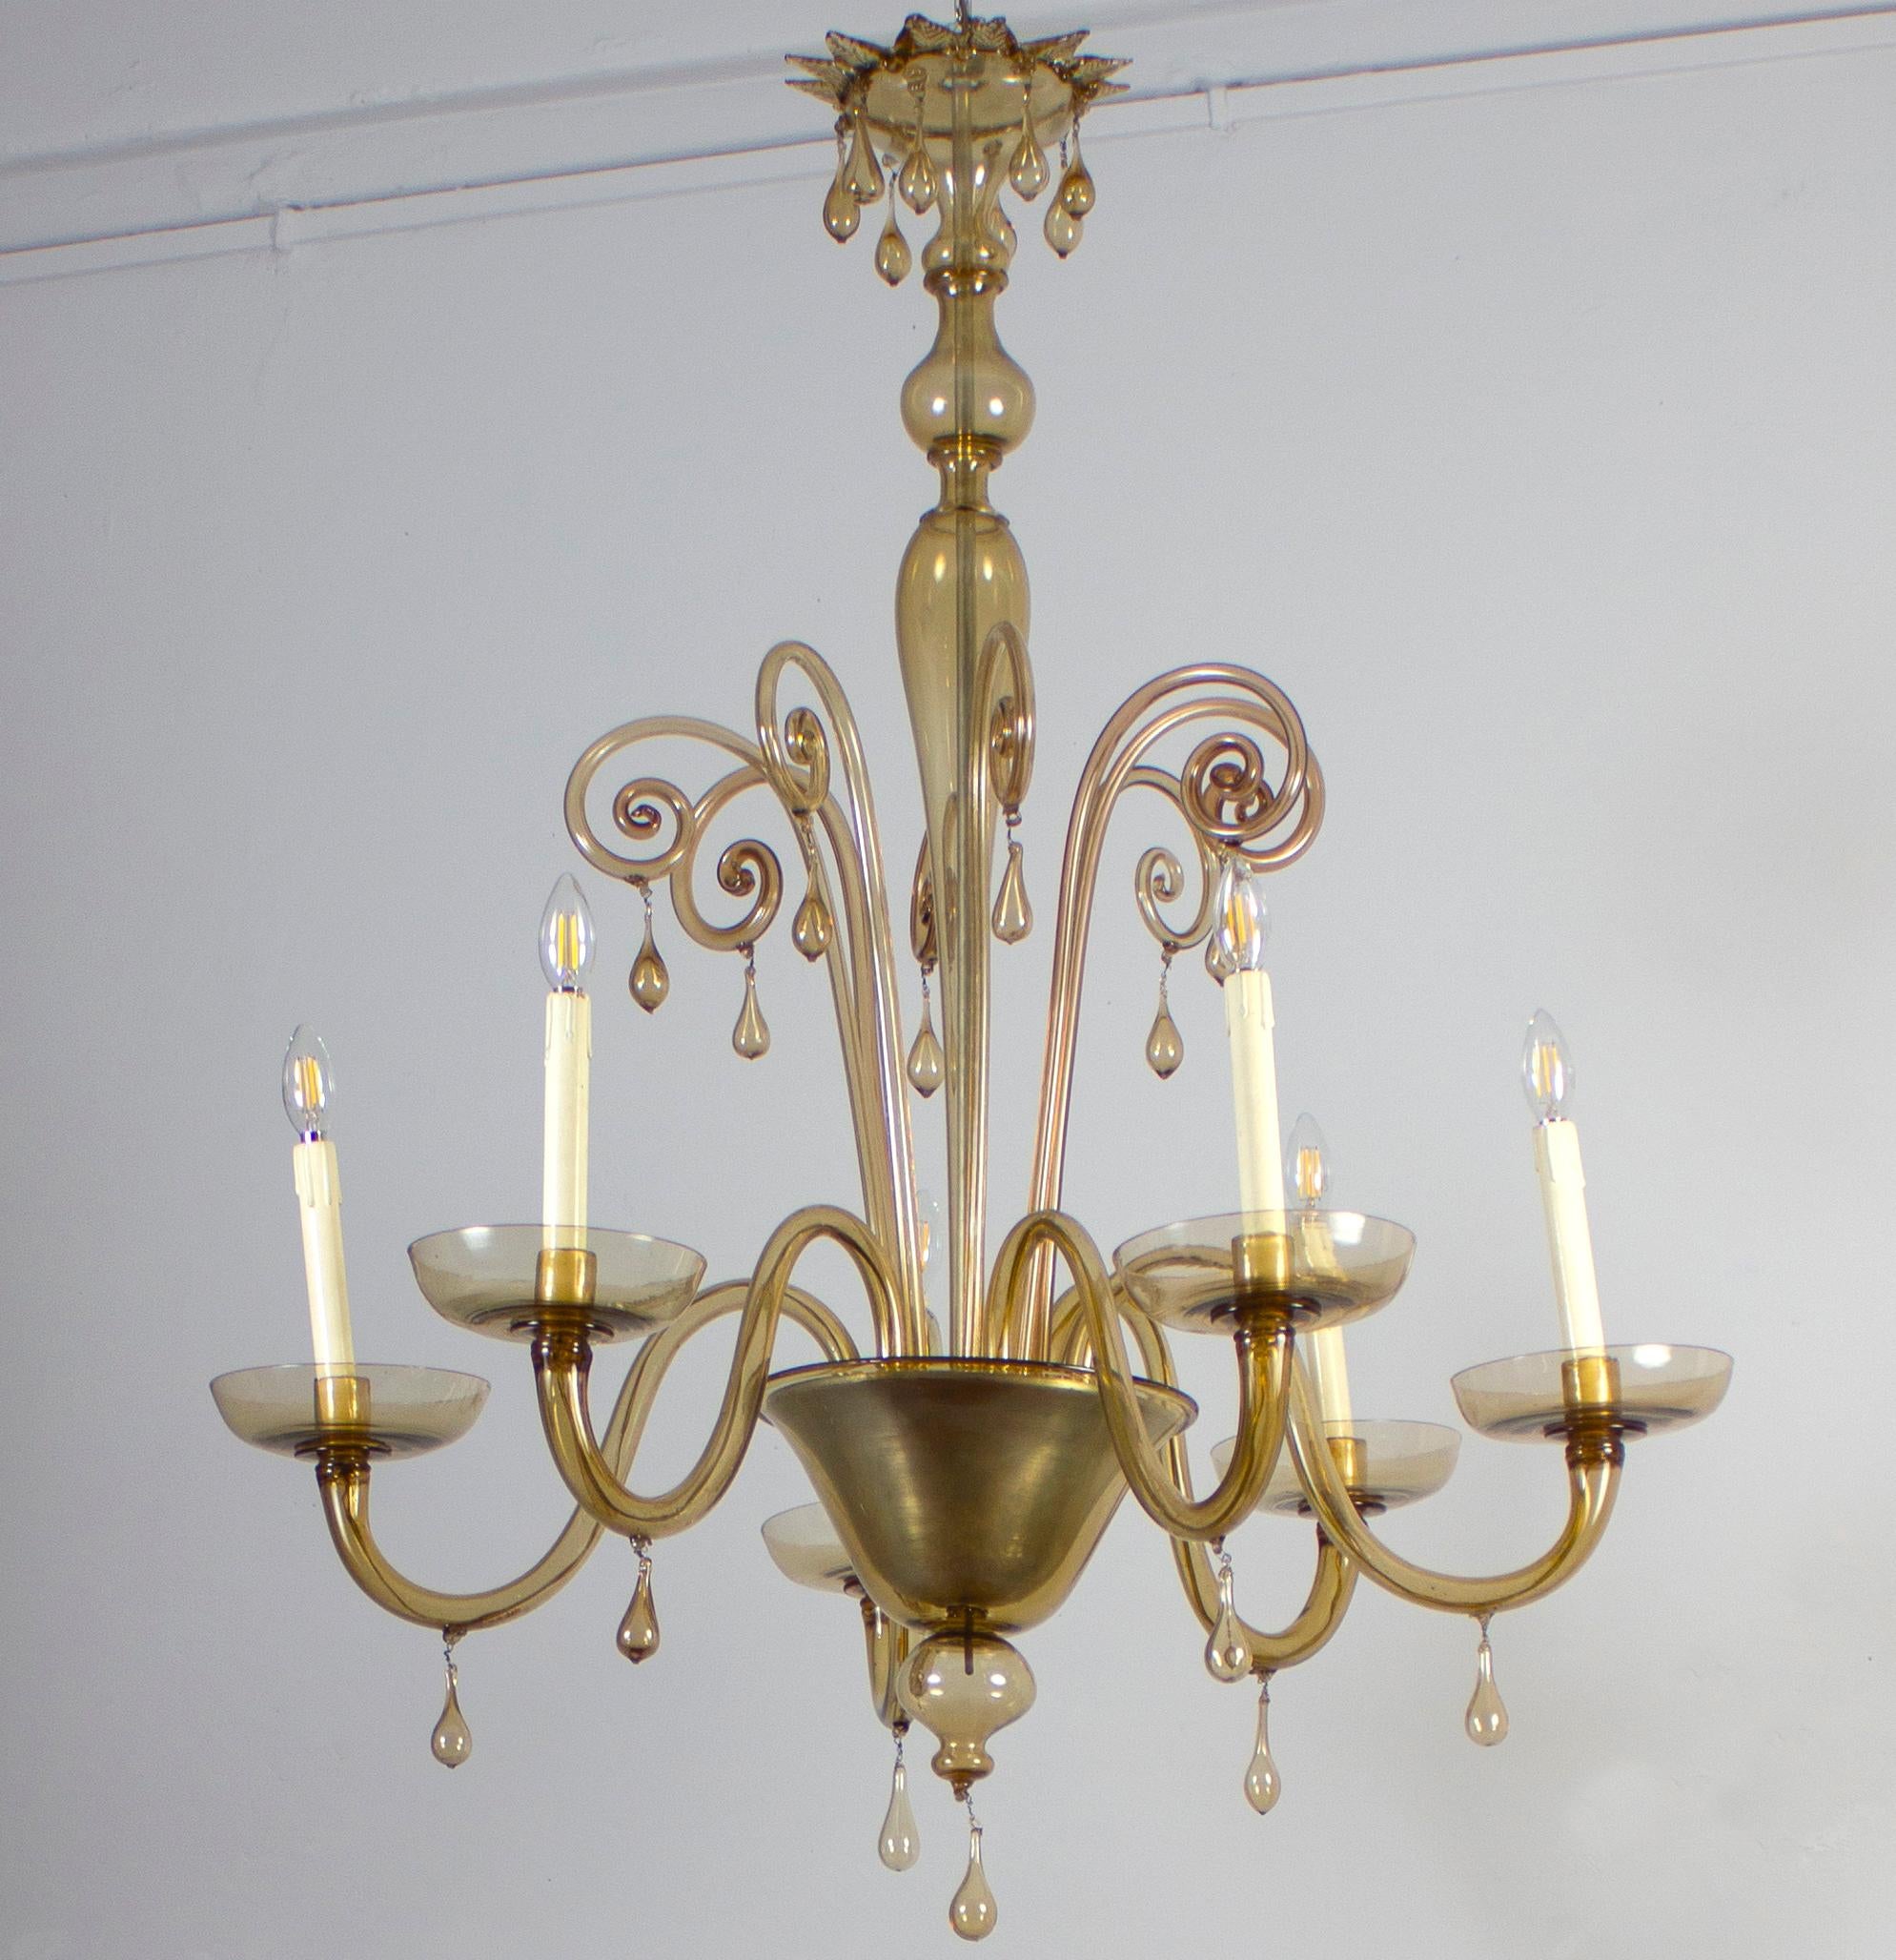 This elegant amber color chandelier  features 6 arms .
Cleaned and re-wired, in full working order and ready to use. In excellent vintage condition. The  glasses, all original and in good condition, are without chips or cracks. This light fixture